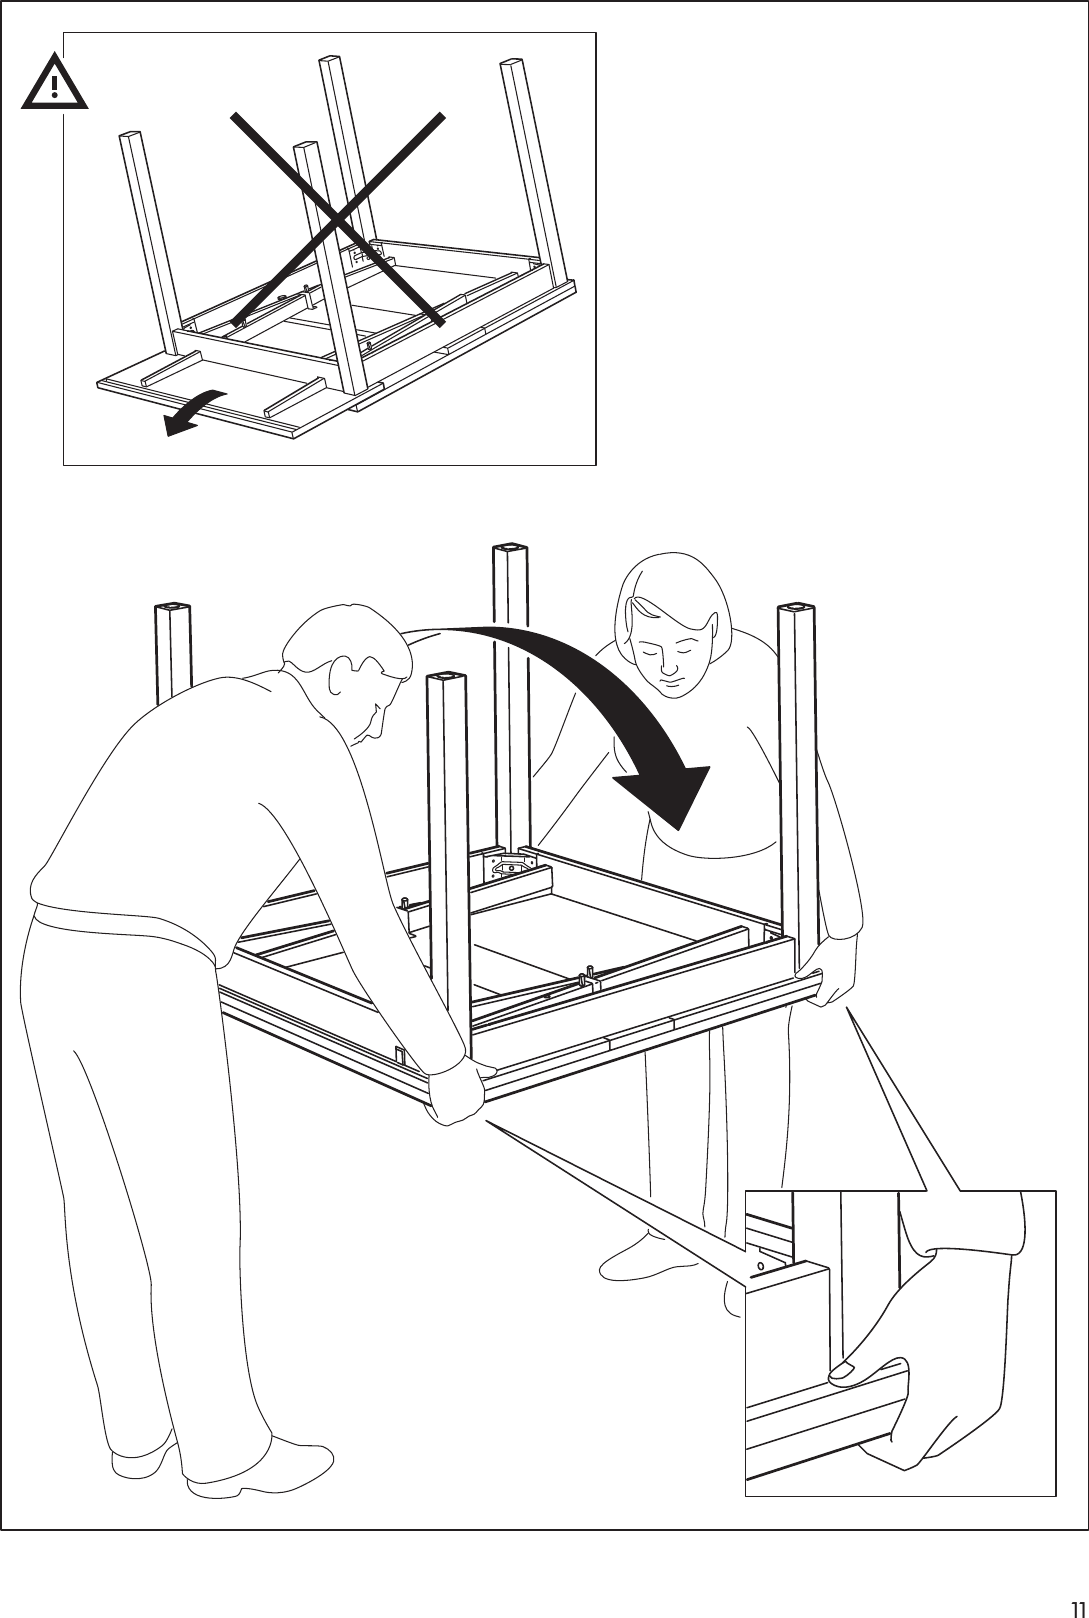 Page 11 of 12 - Ikea Ikea-Bjursta-Extendable-Dining-Table-20-28-35-X35-Assembly-Instruction